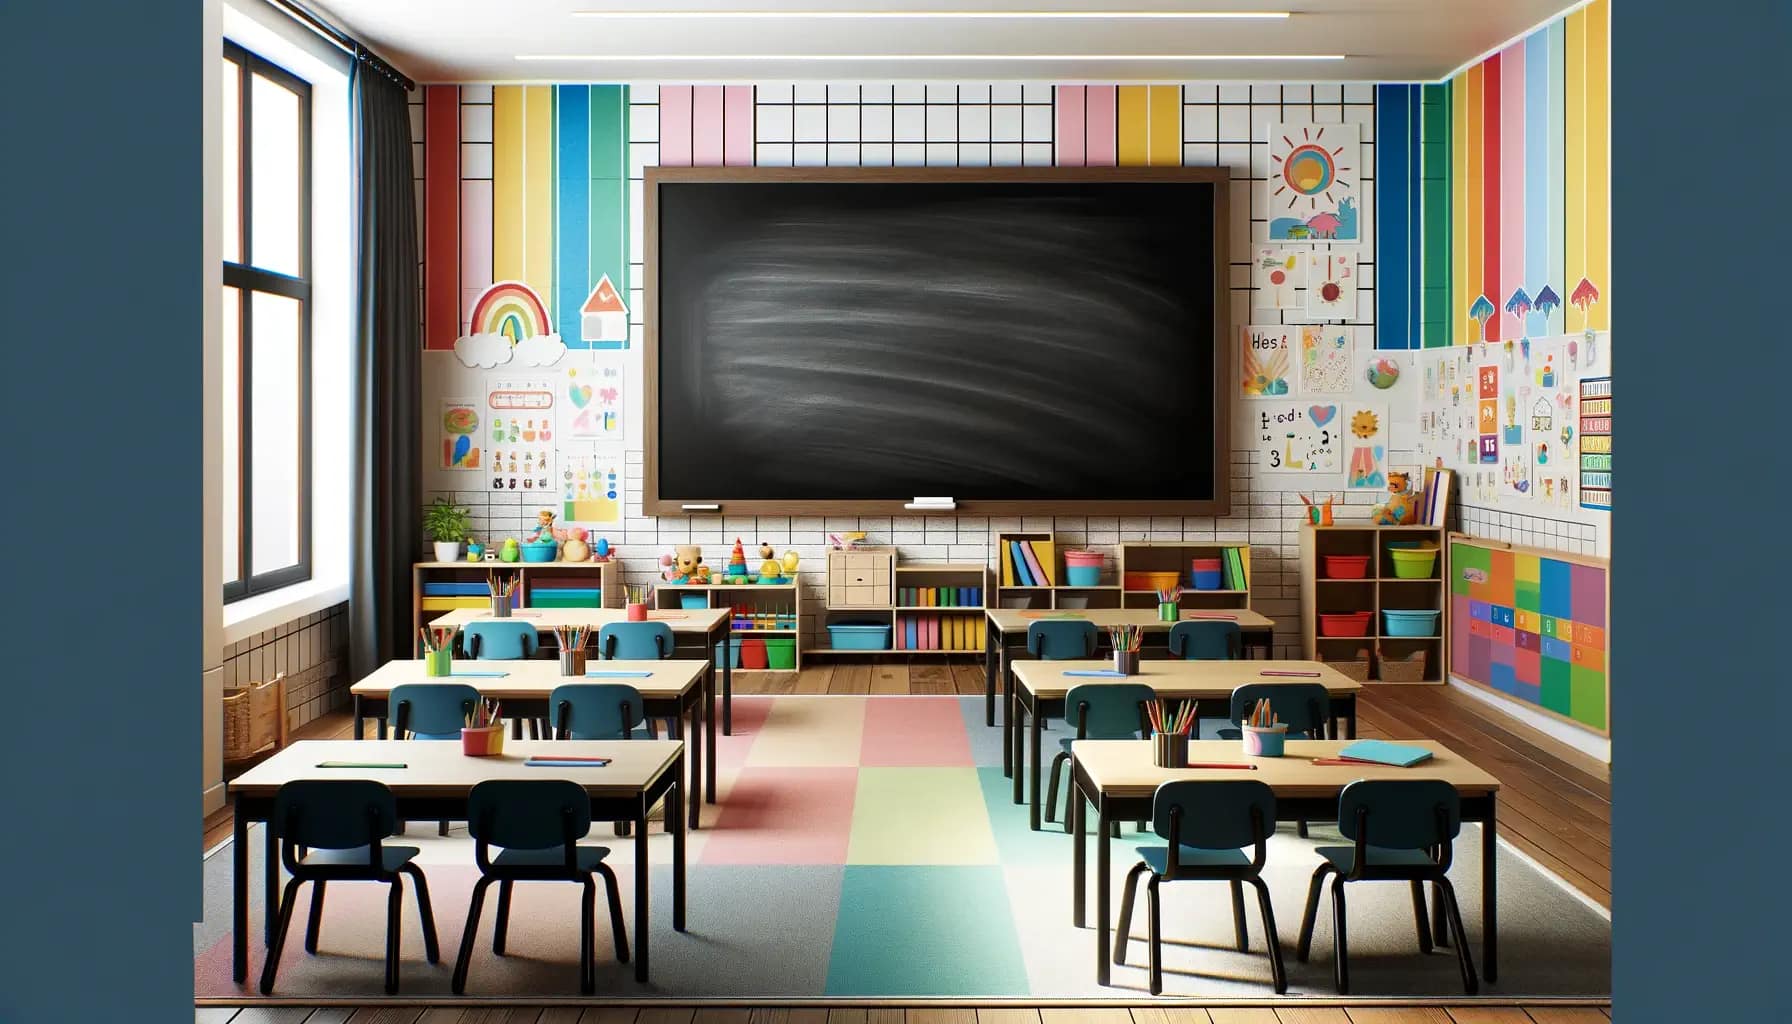 image of a classroom with a blackboard